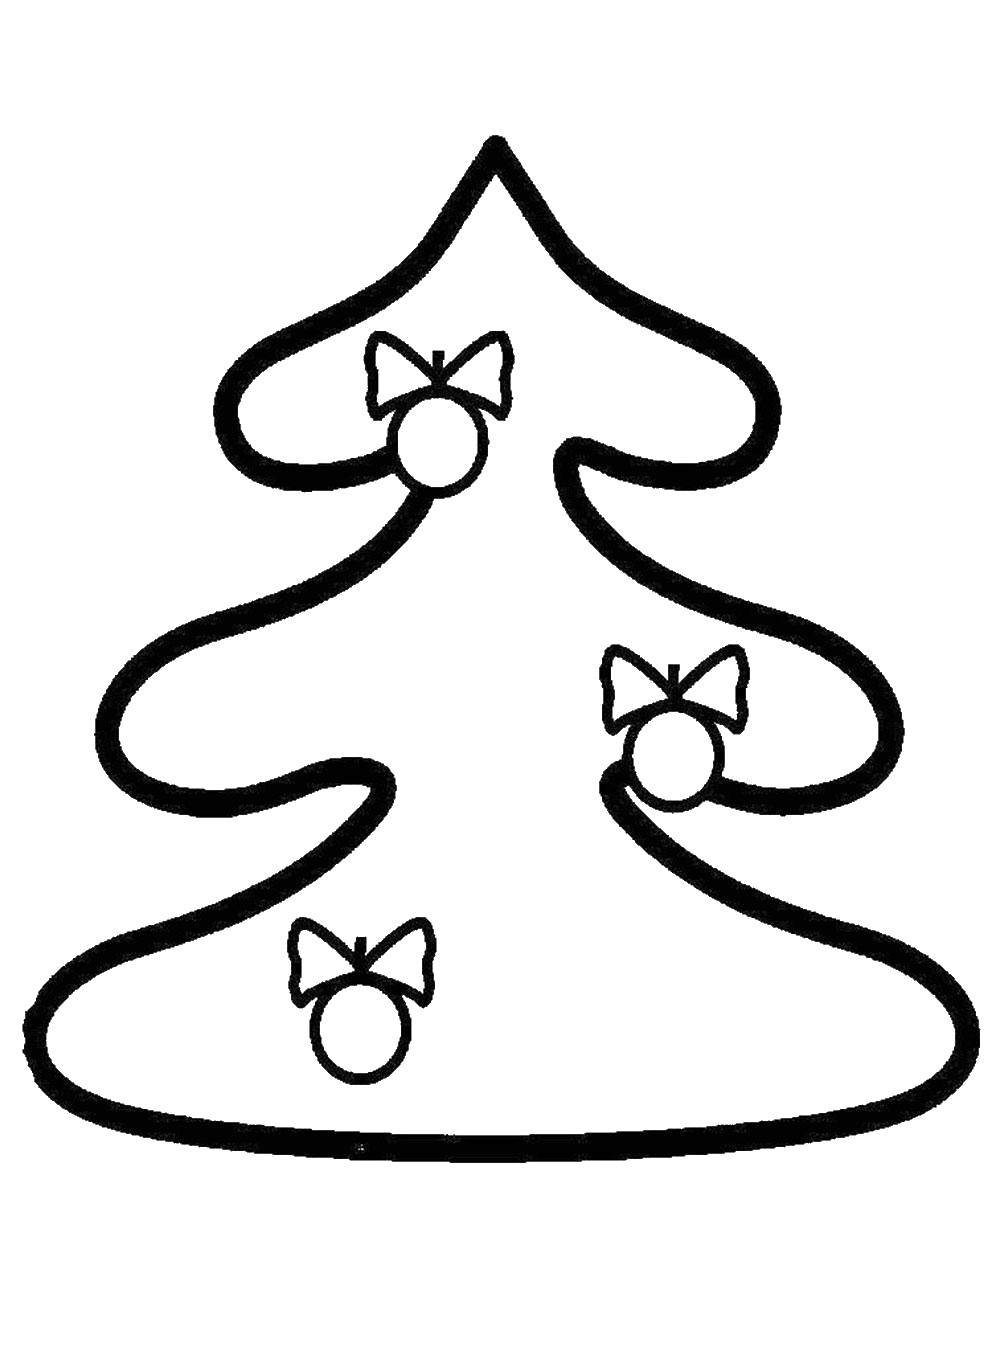 Coloring Tree with toy. Category coloring for little ones. Tags:  tree.